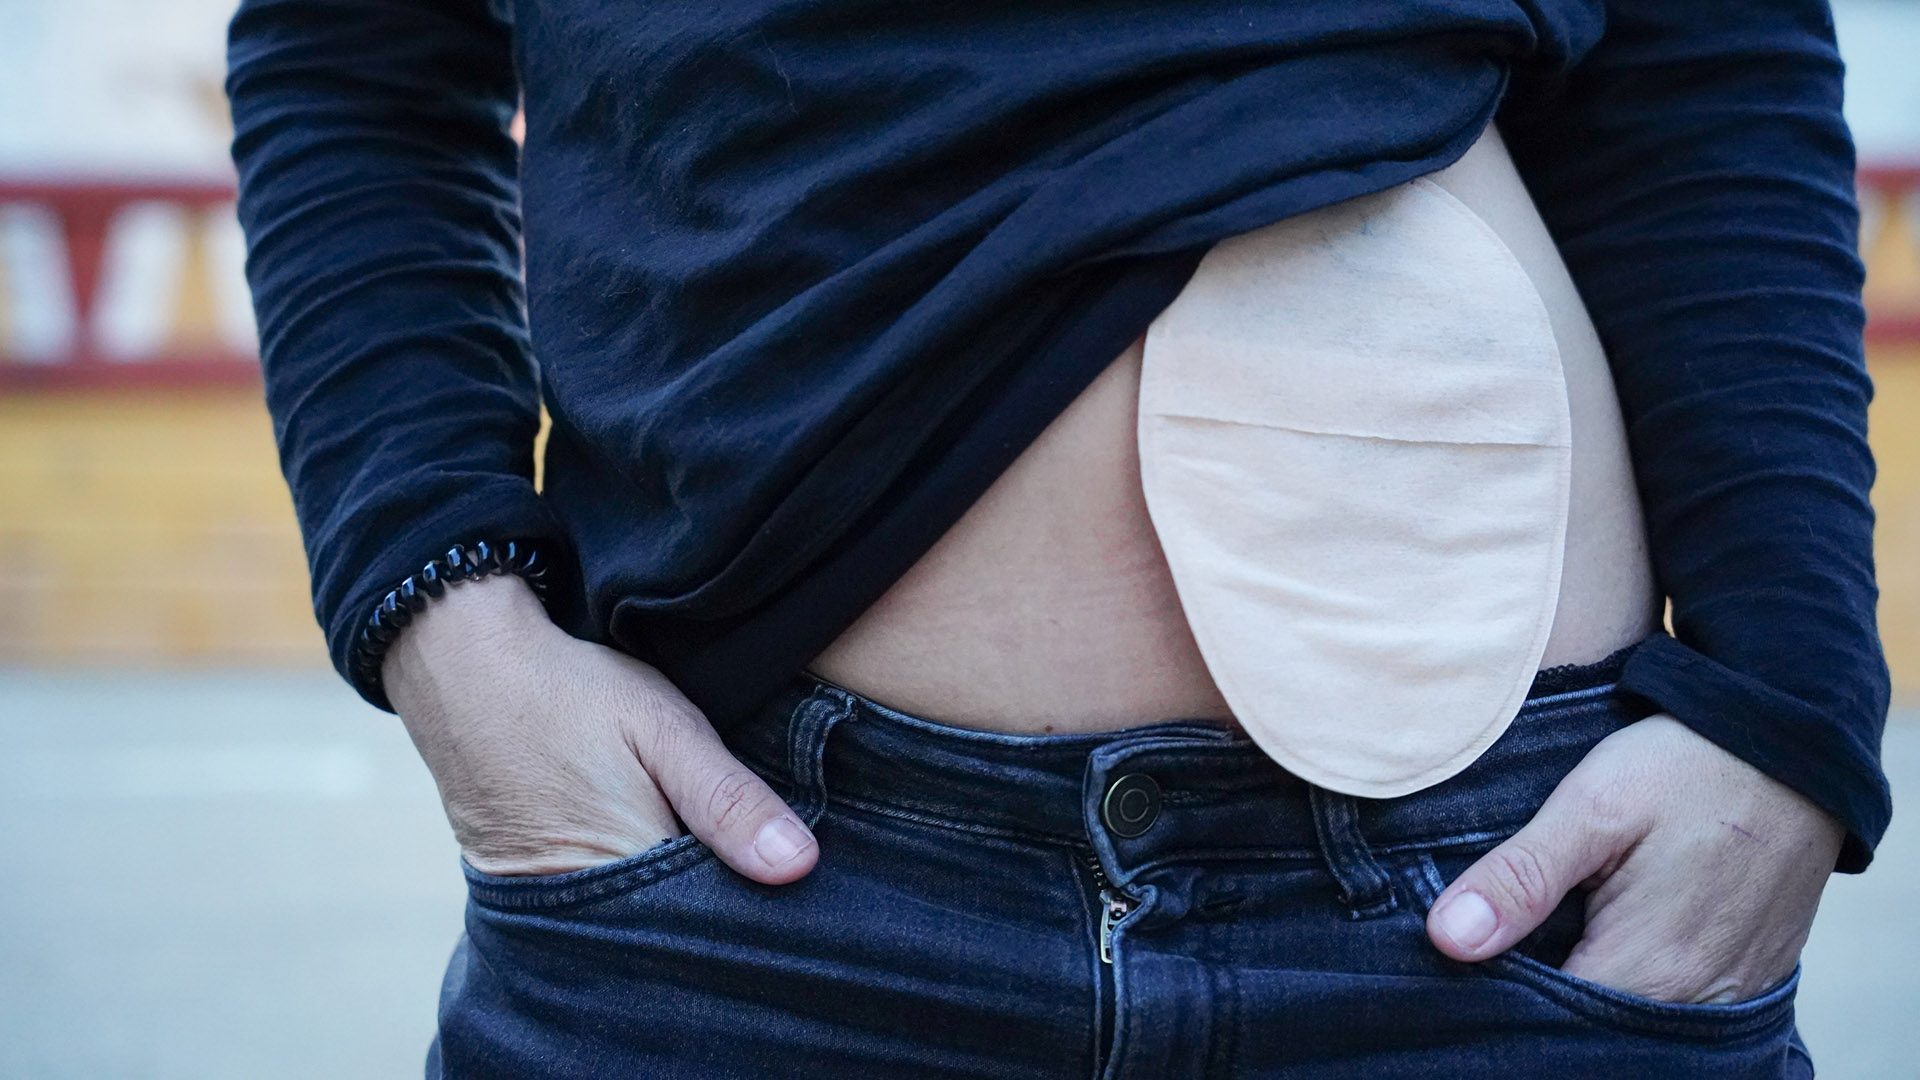 An unidentified person in dark clothing wears an ostomy bag